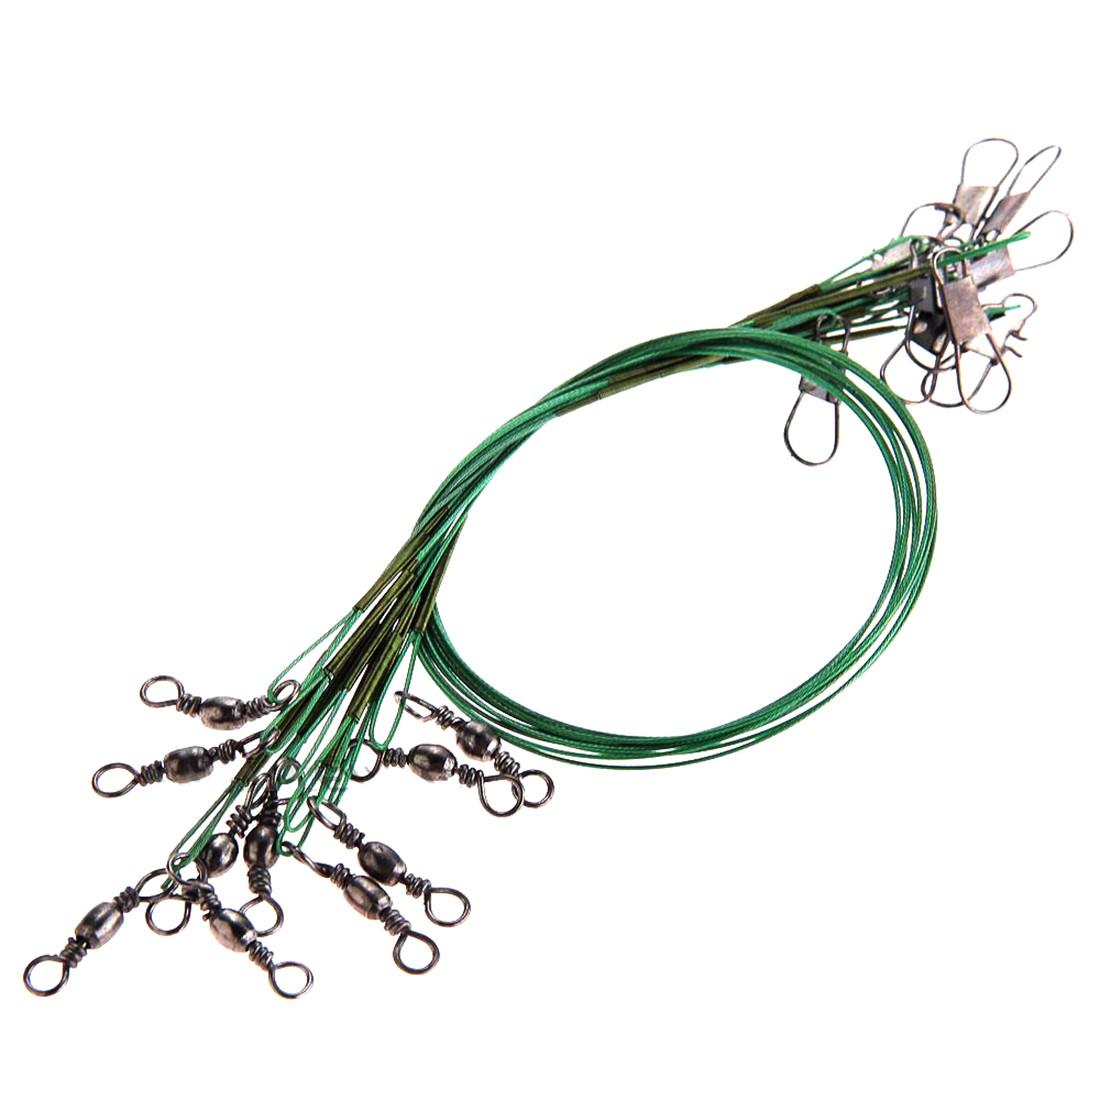 Image of Hot Sale High Quality Practical 10pcs 28cm Copper Fishing Leader Wire Fish Tackle Rig Dark Green